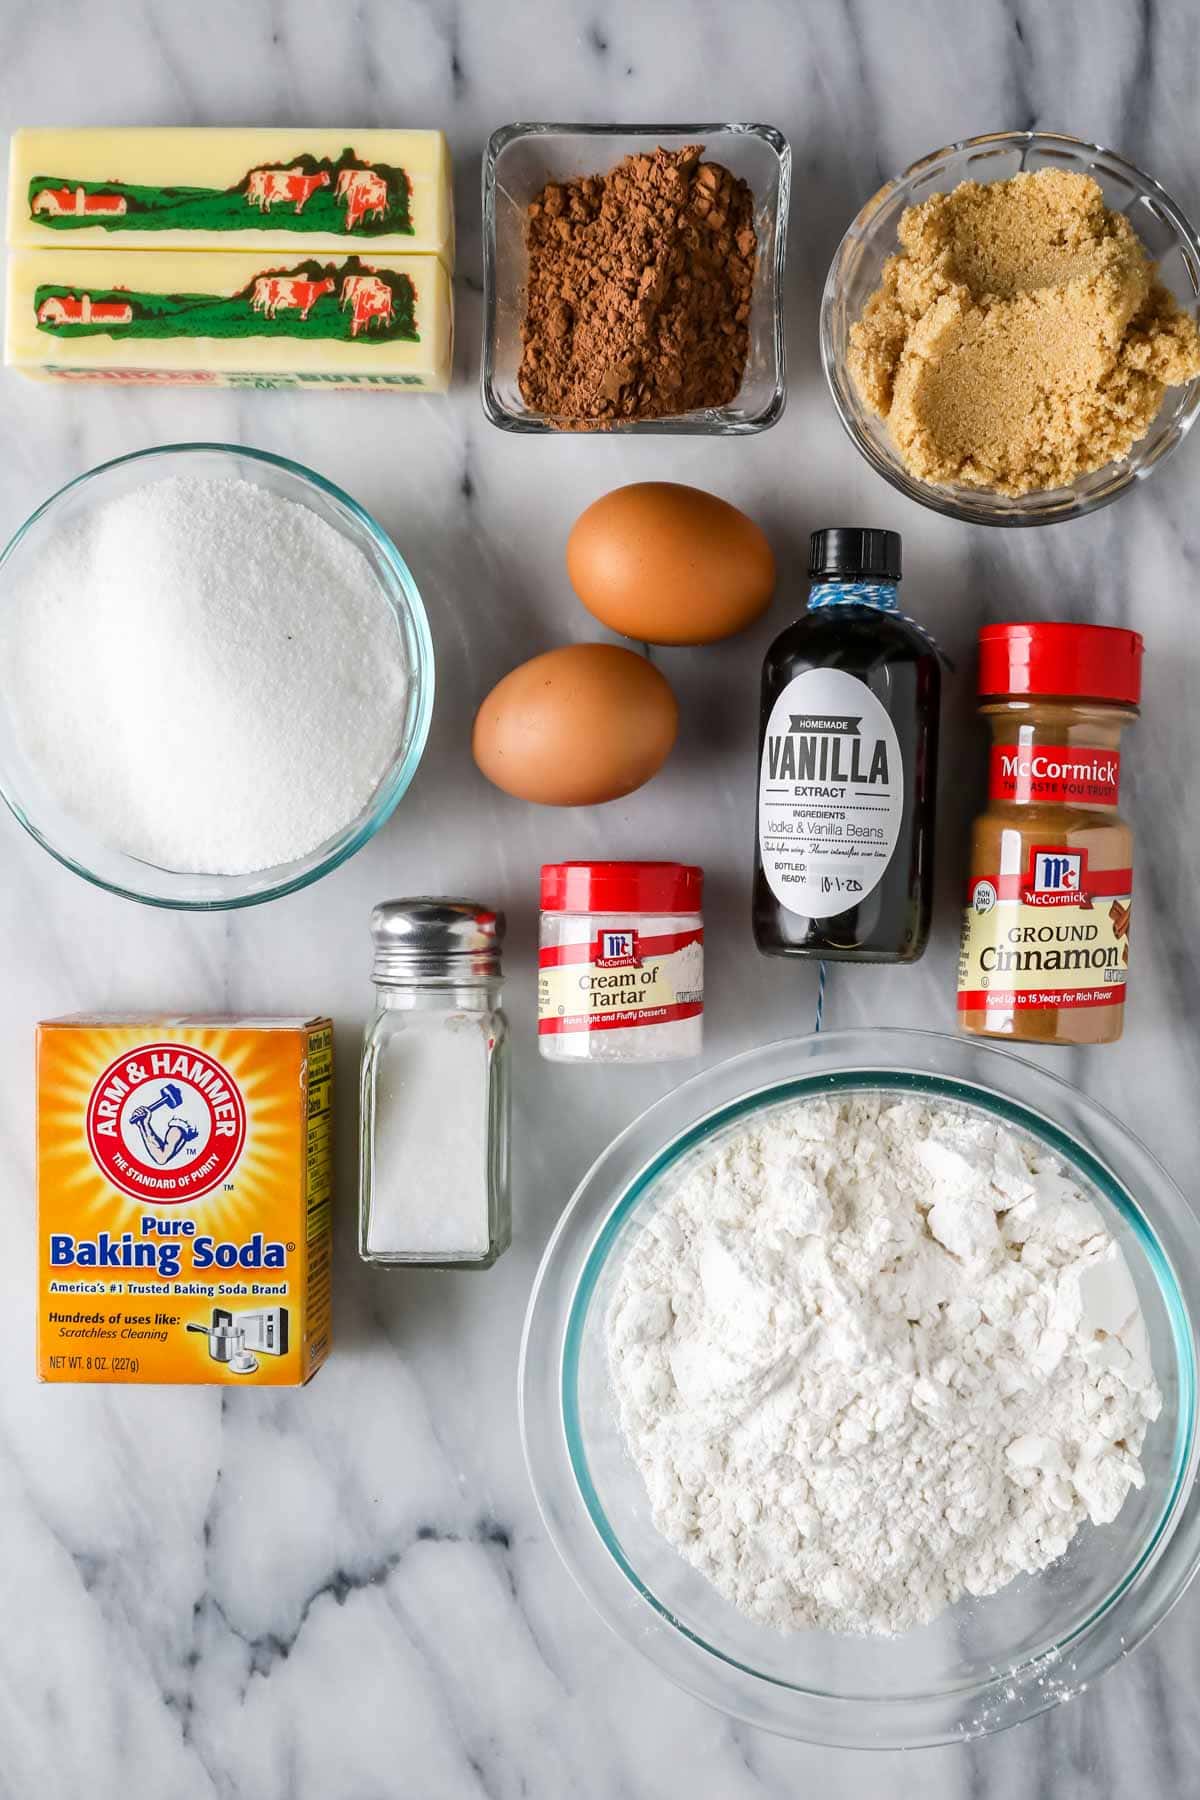 Overhead view of ingredients including sugar, butter, cocoa powder, cinnamon, cream of tartar, and more.